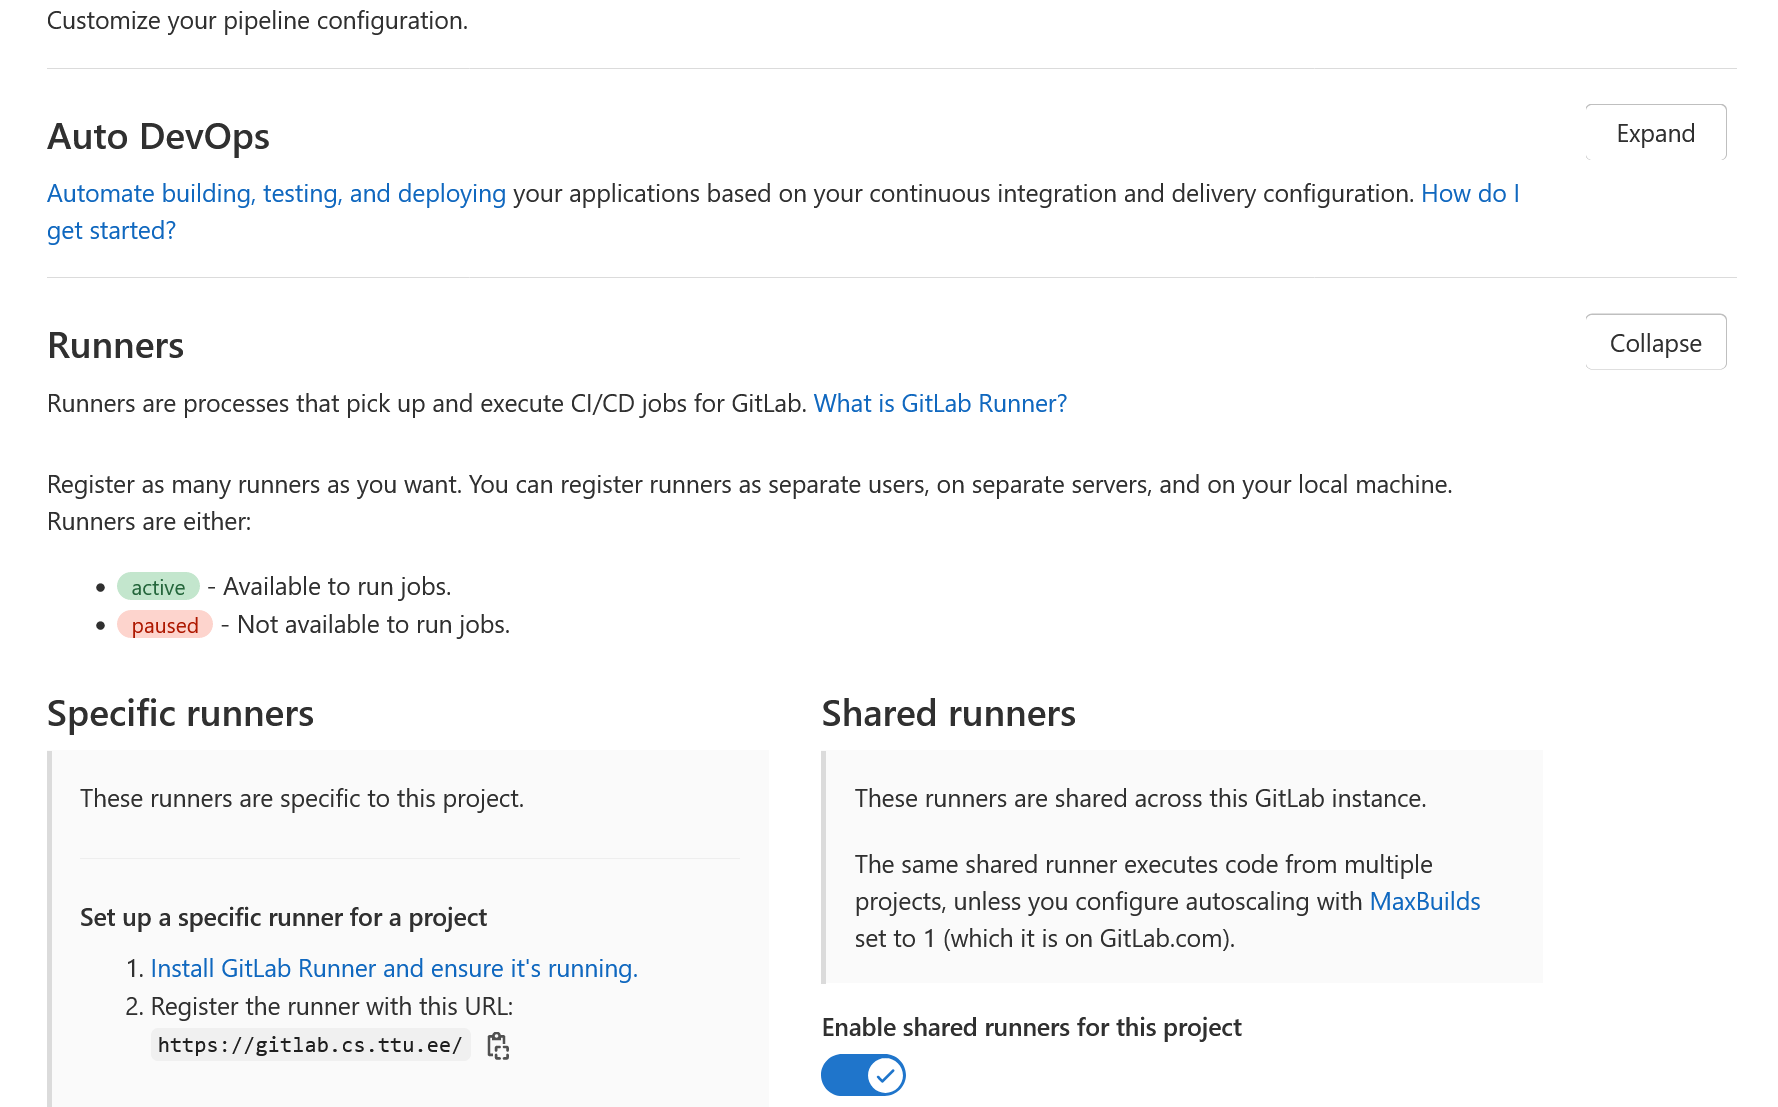 ../../_images/gitlab-enable-shared-runners1.png